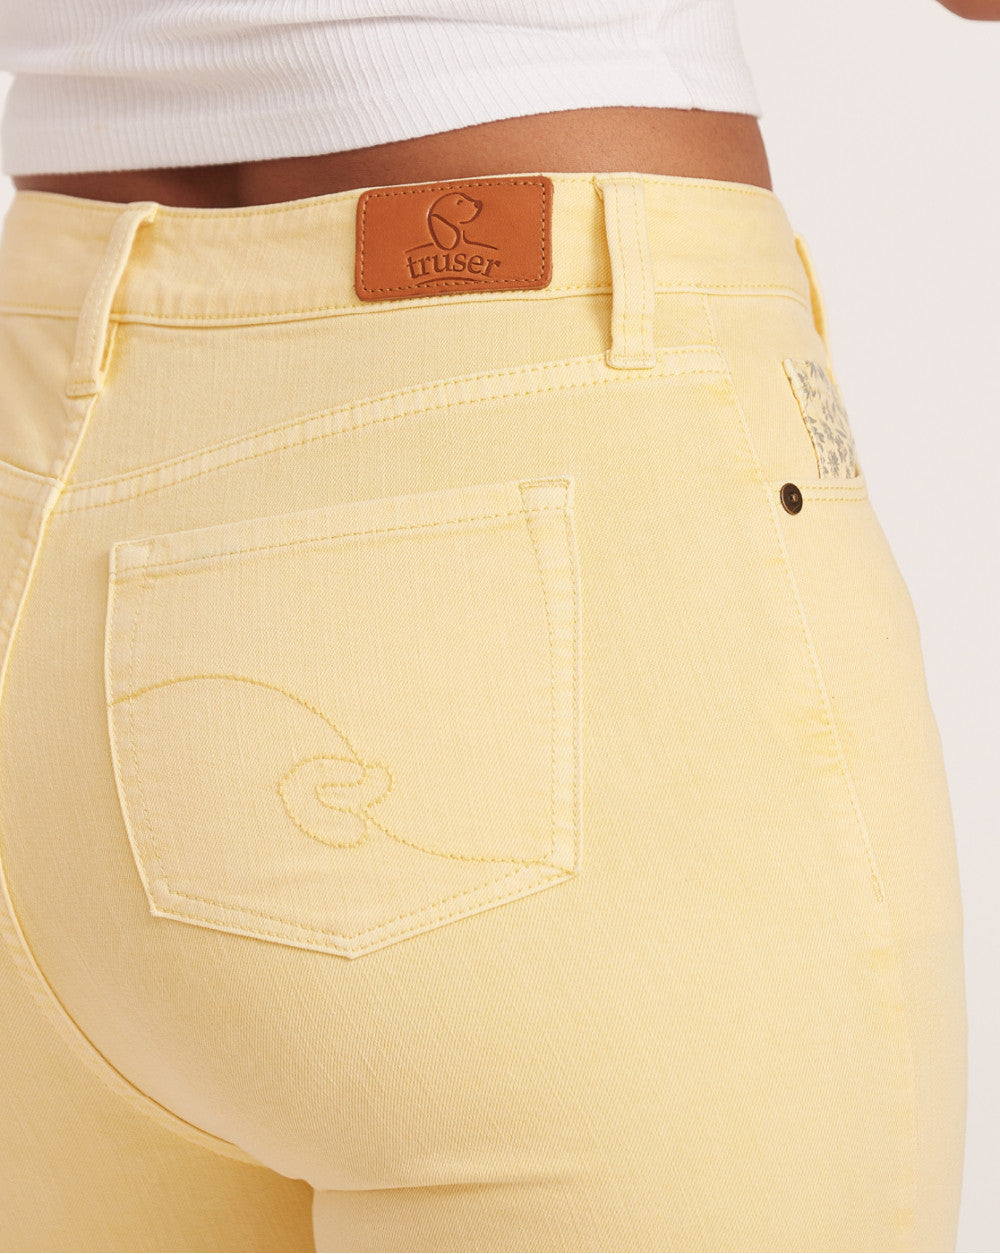 Skinny Fit High Waist Colored Jeans - Daffodil Yellow